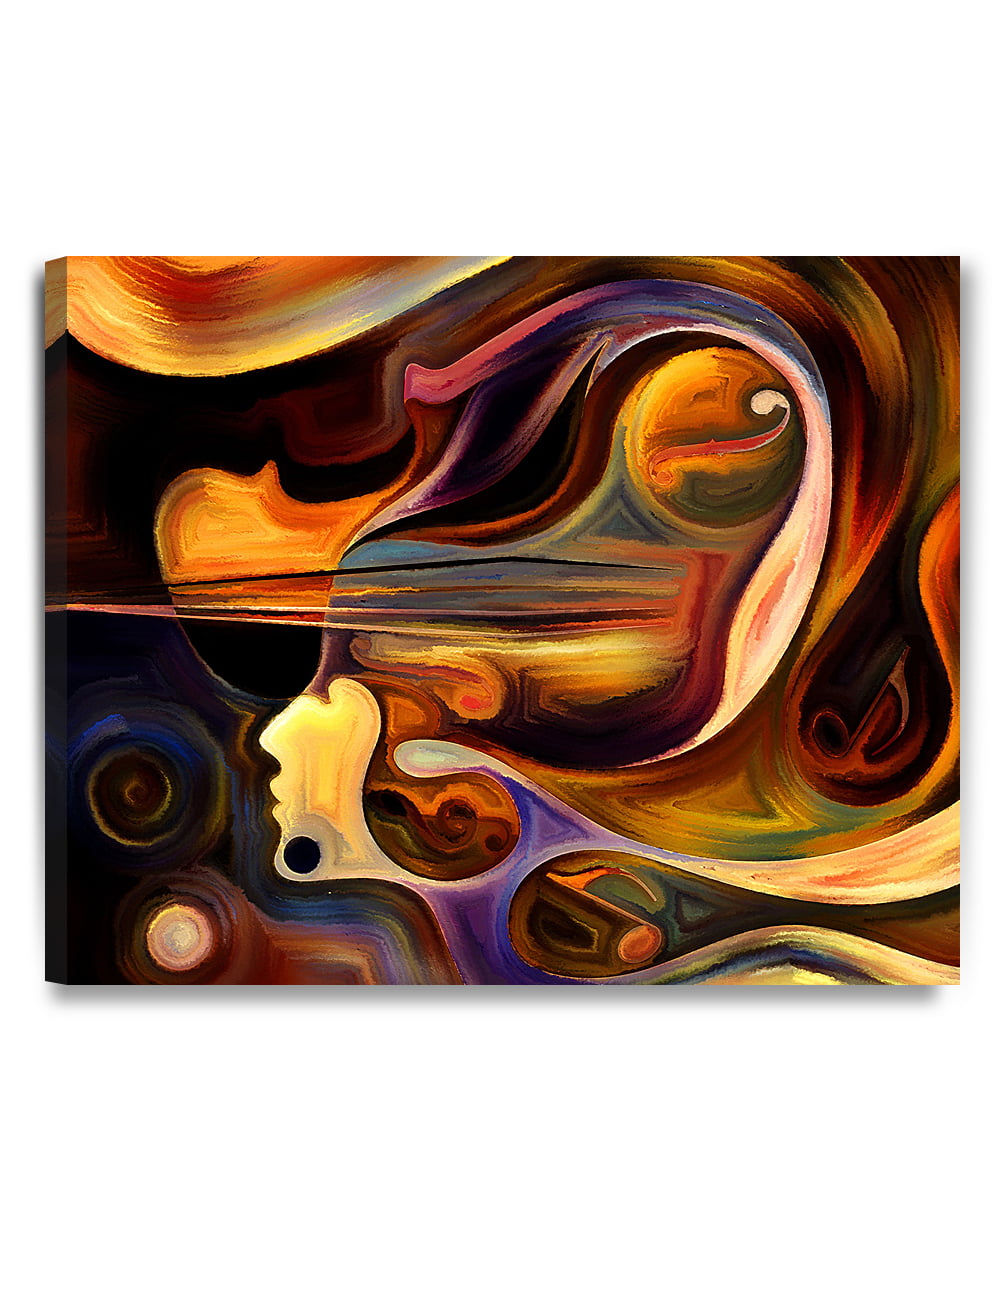 DECORARTS Abstract Art( Inner Melody series), Giclee Prints abstract  modern canvas wall art for Wall Decor. 30x24